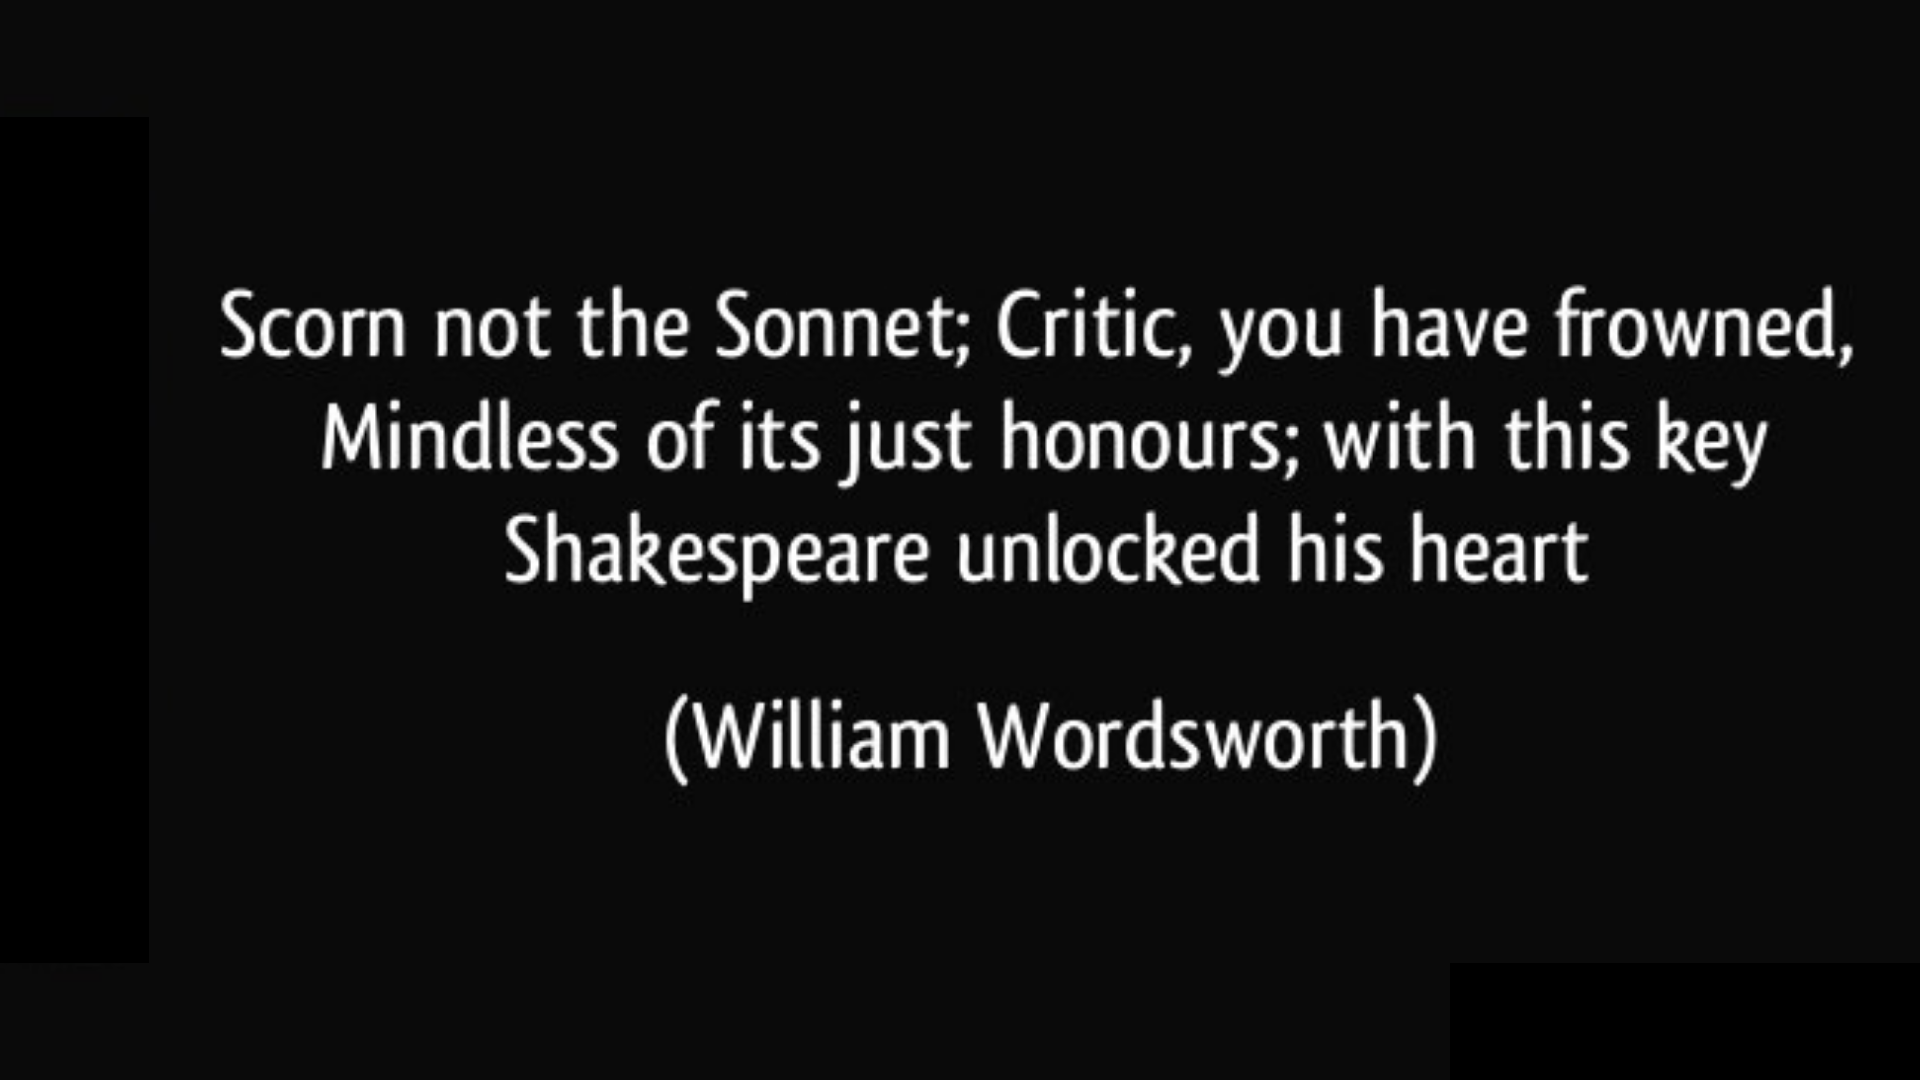 Summary and Analysis of “Scorn Not The Sonnet” by William Wordsworth: 2022<